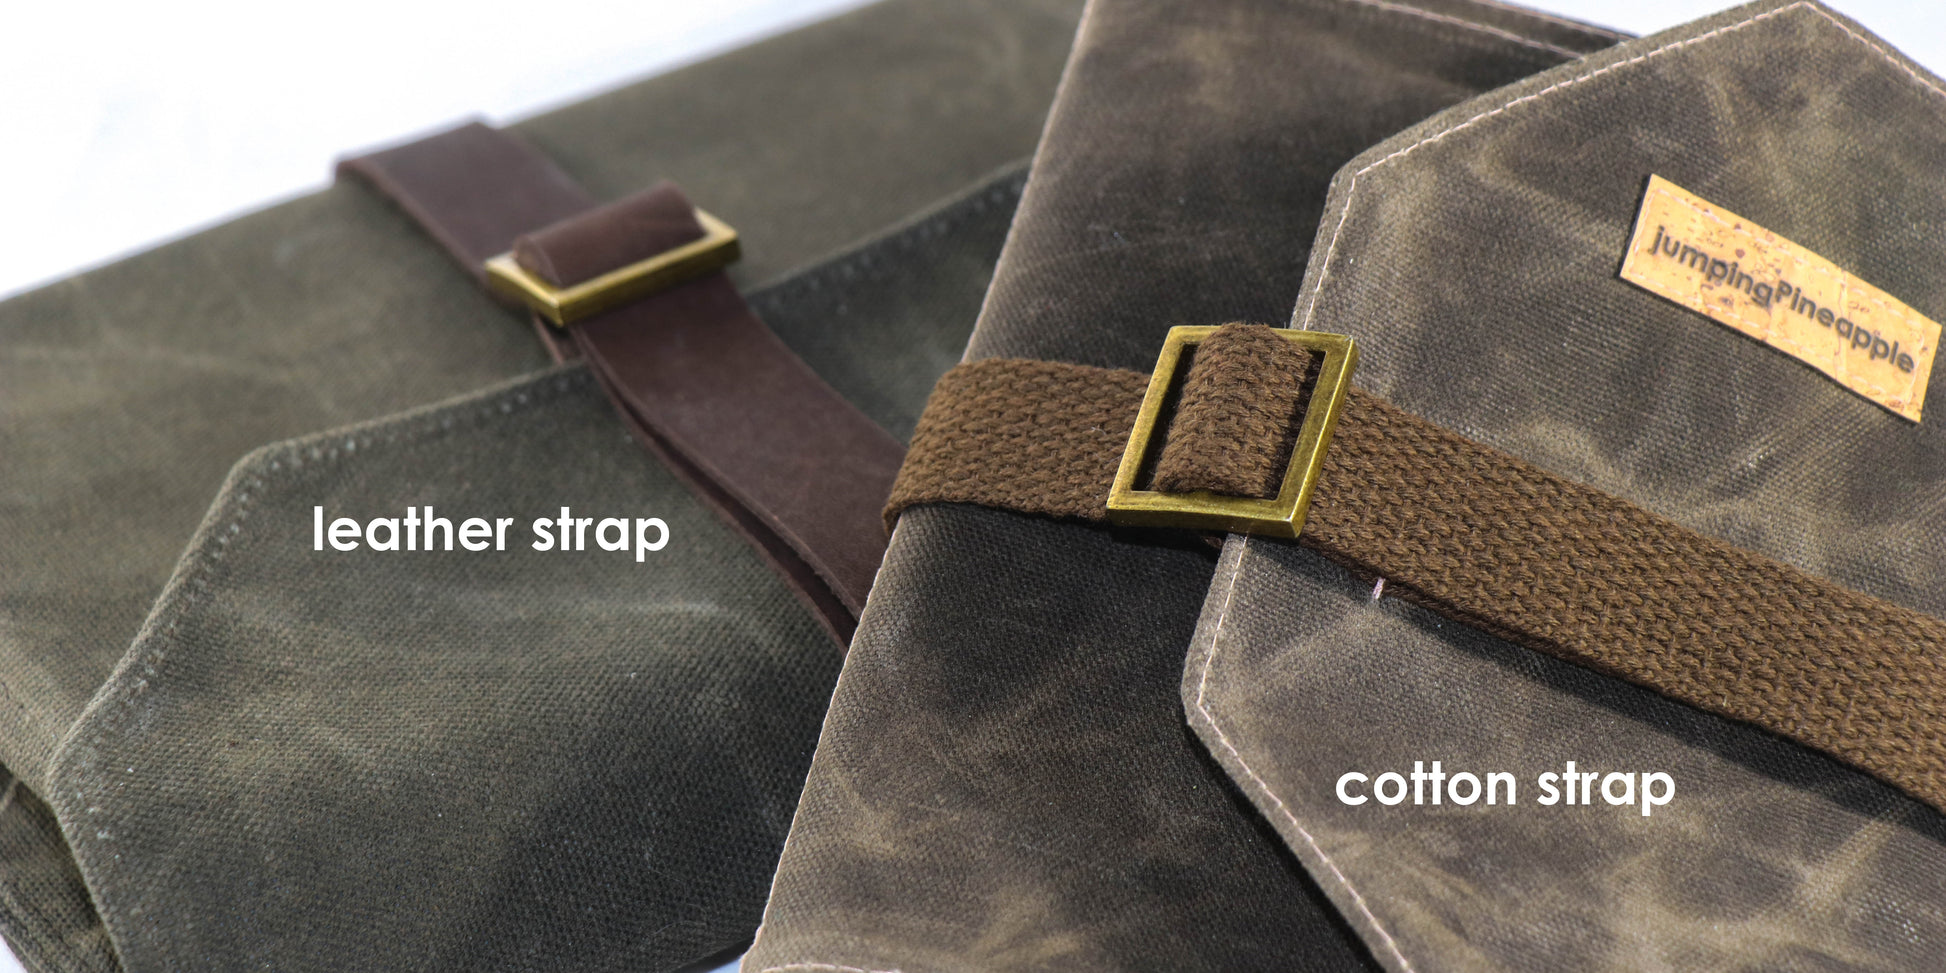 dark brown artist roll with leather strap and cotton strap shown